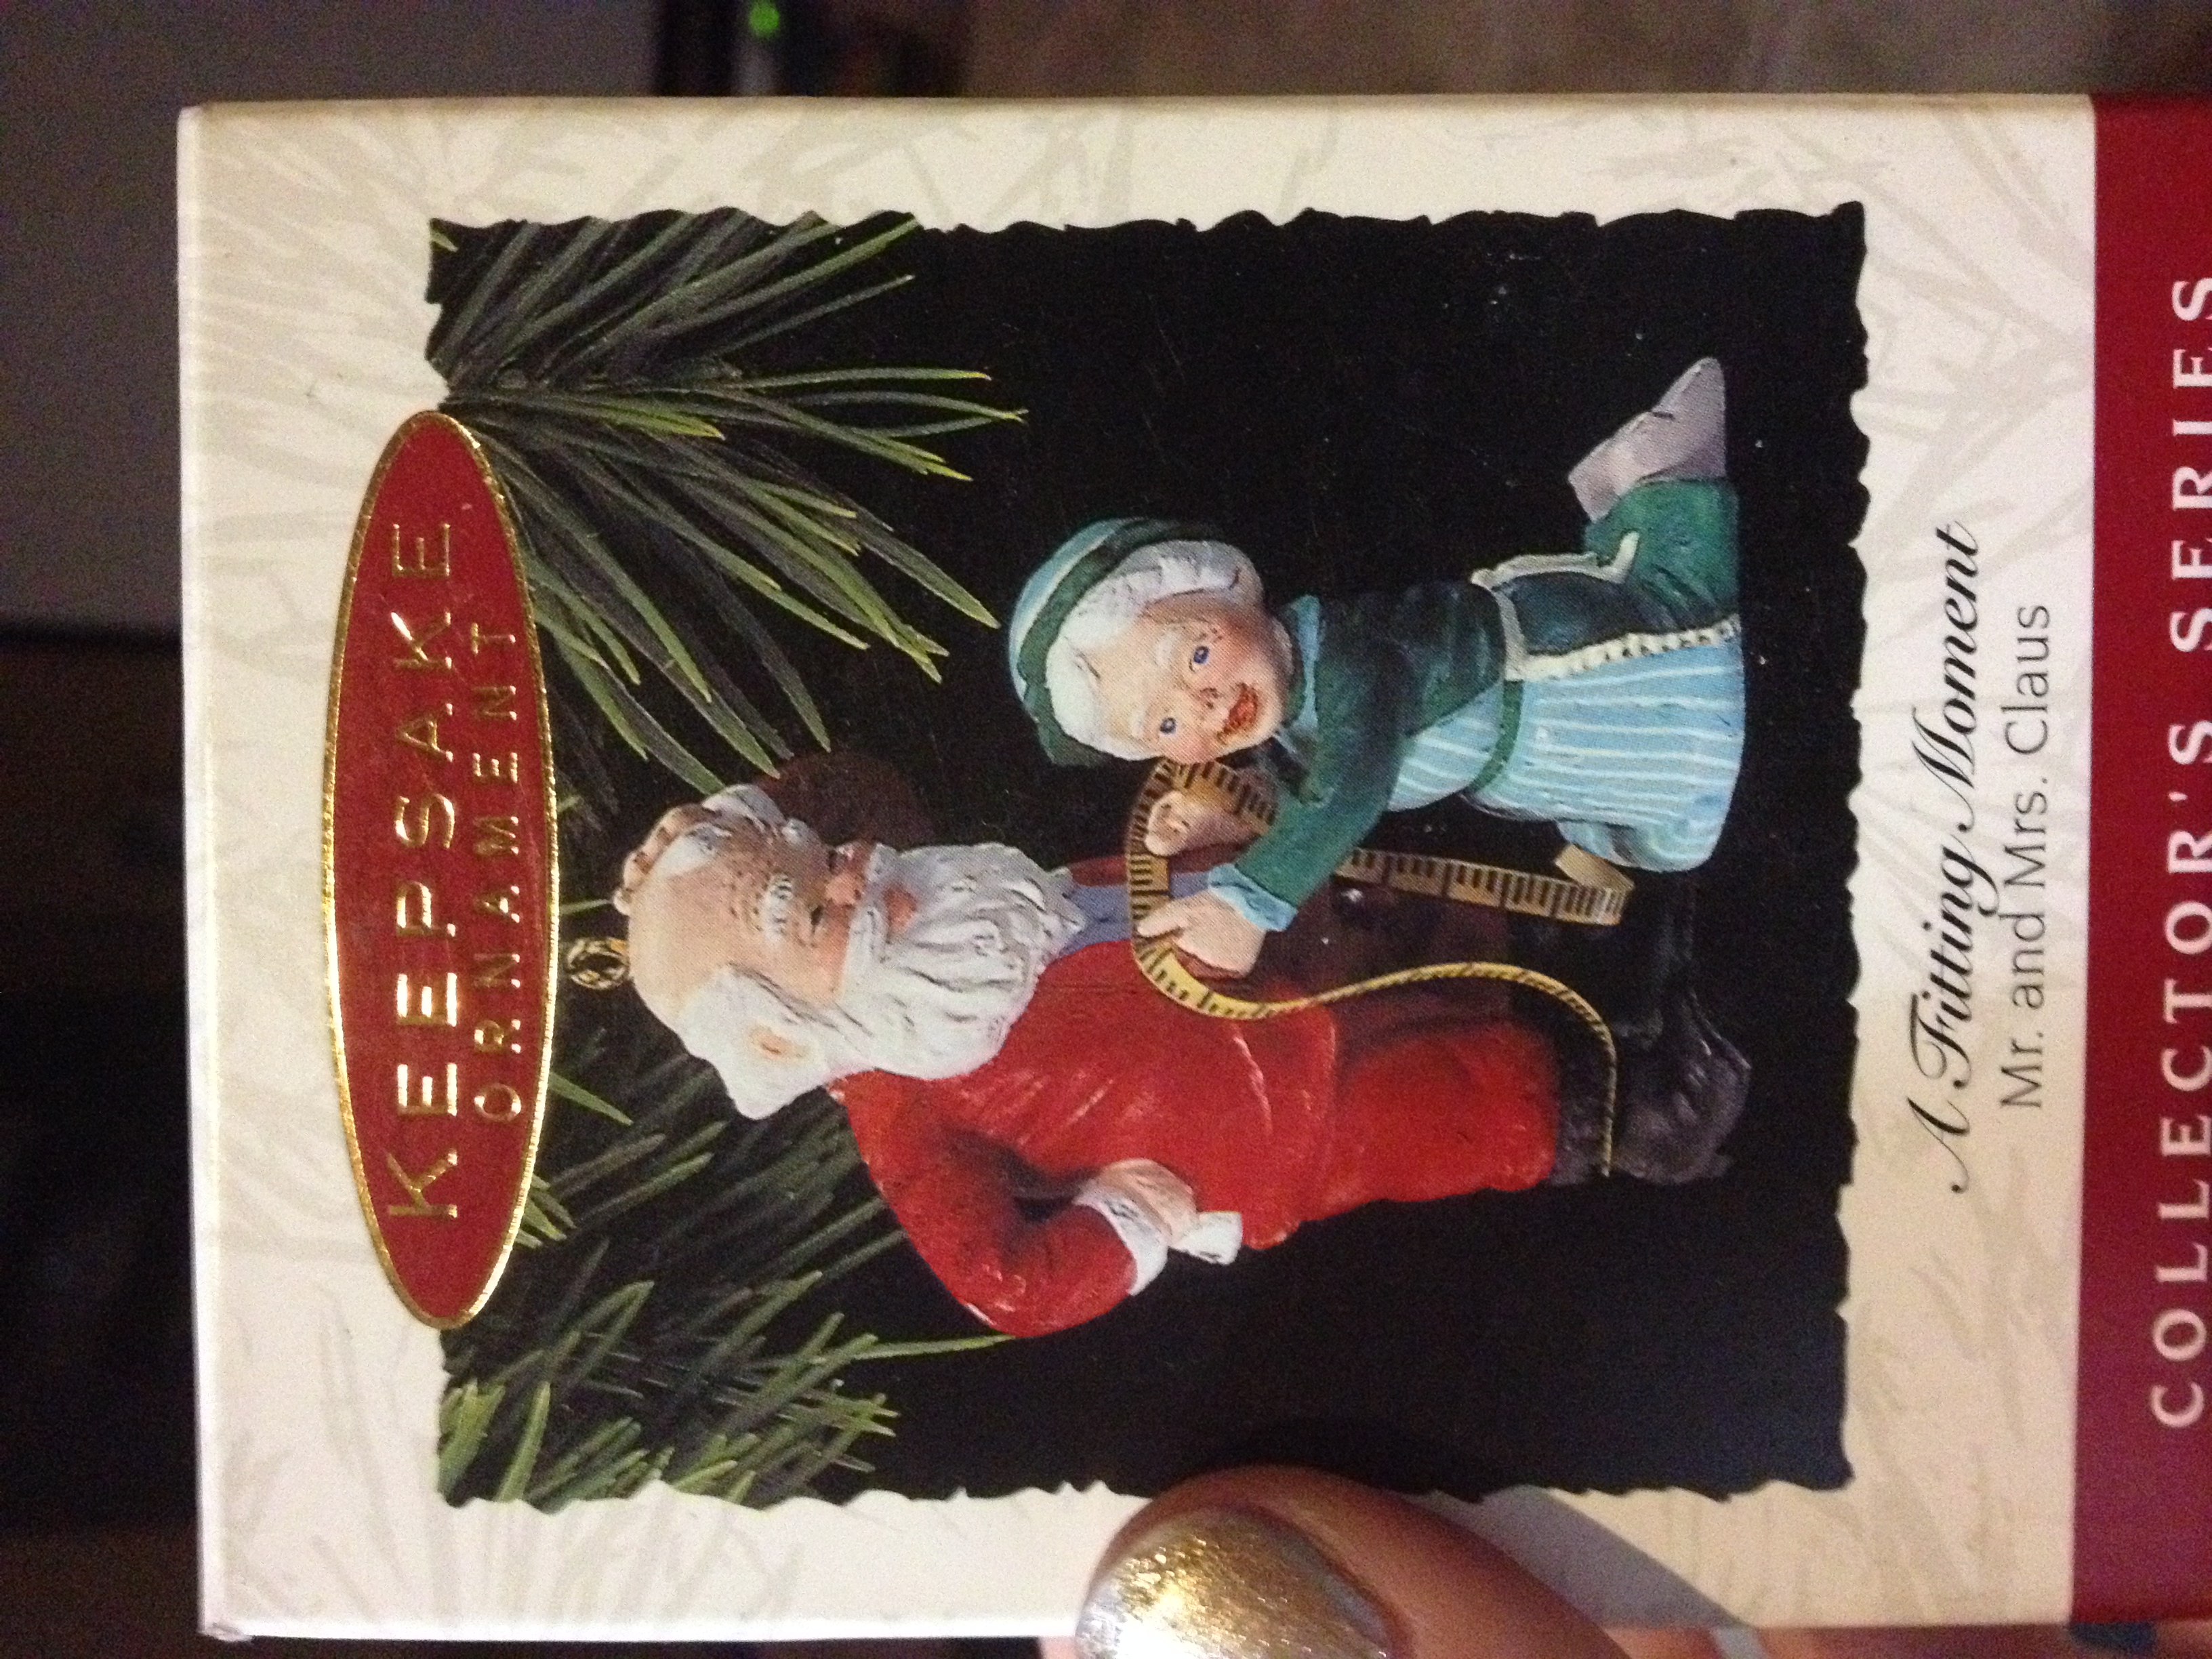 This gem was a childhood ornament I discovered later in life. Hallmark had a sick sense of humor (name of ornament, mrs clause position, measuring tape) or mrs. clause was kinky.